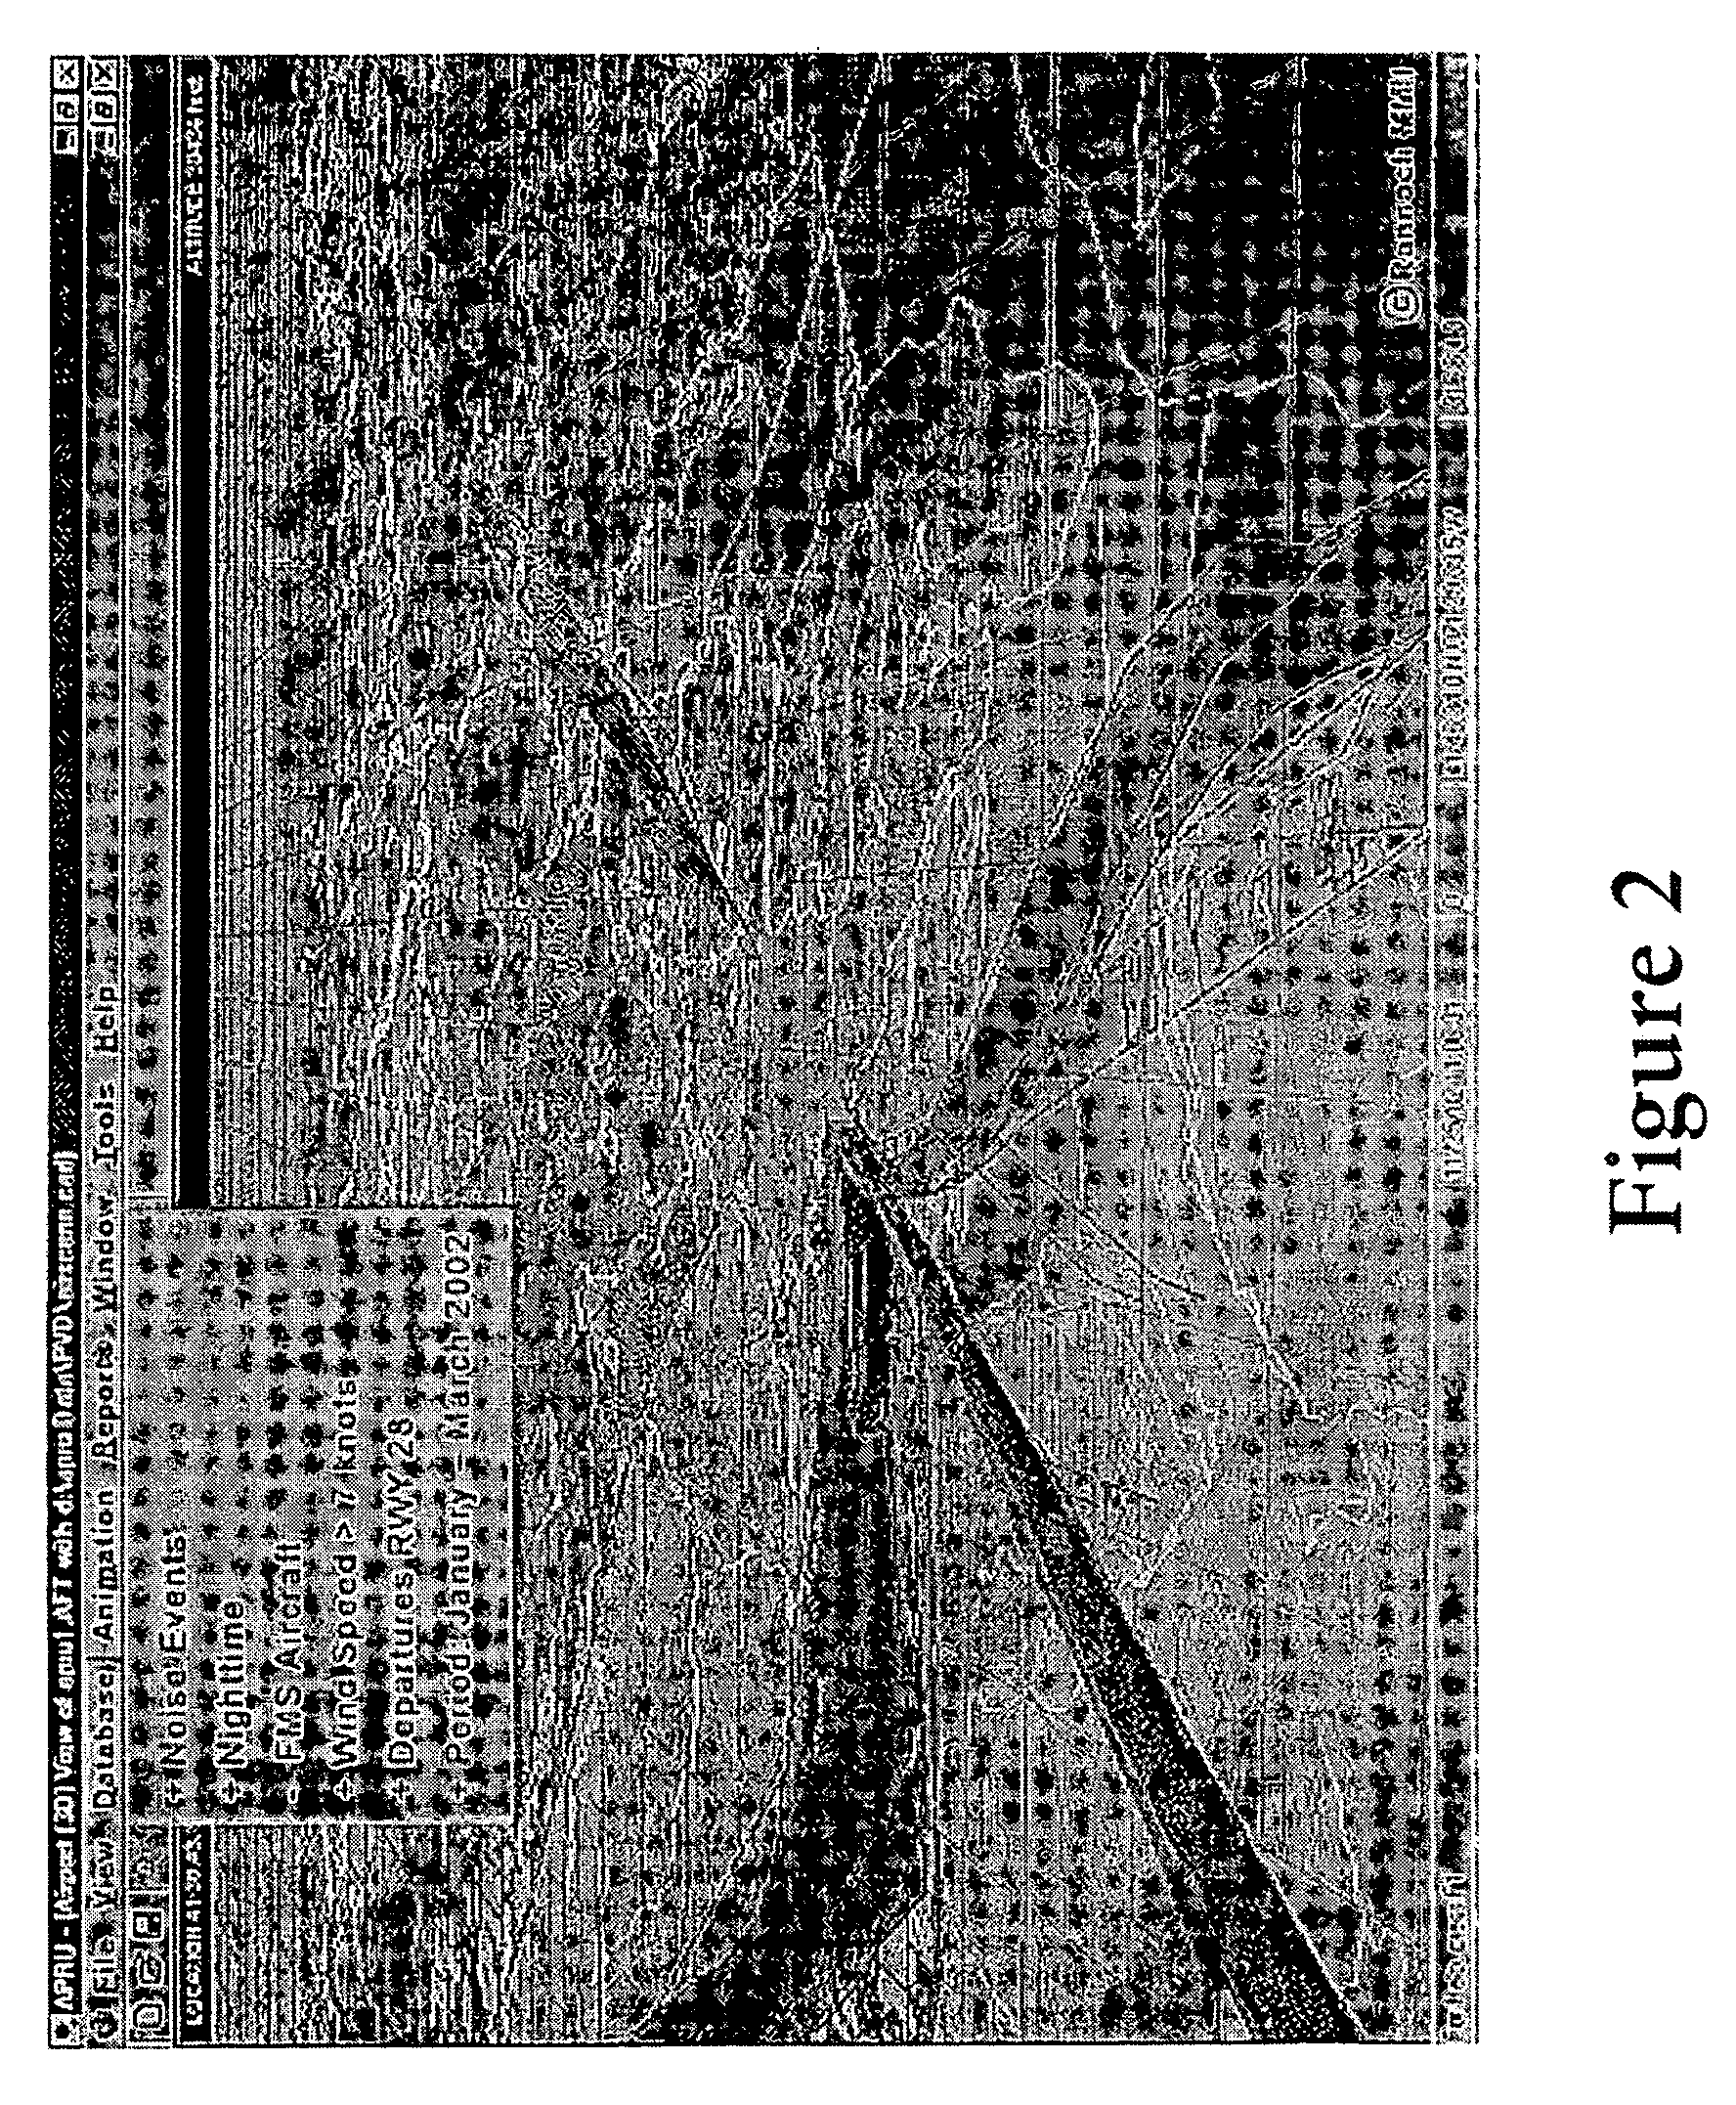 Method and apparatus to correlate aircraft flight tracks and events with relevant airport operations information